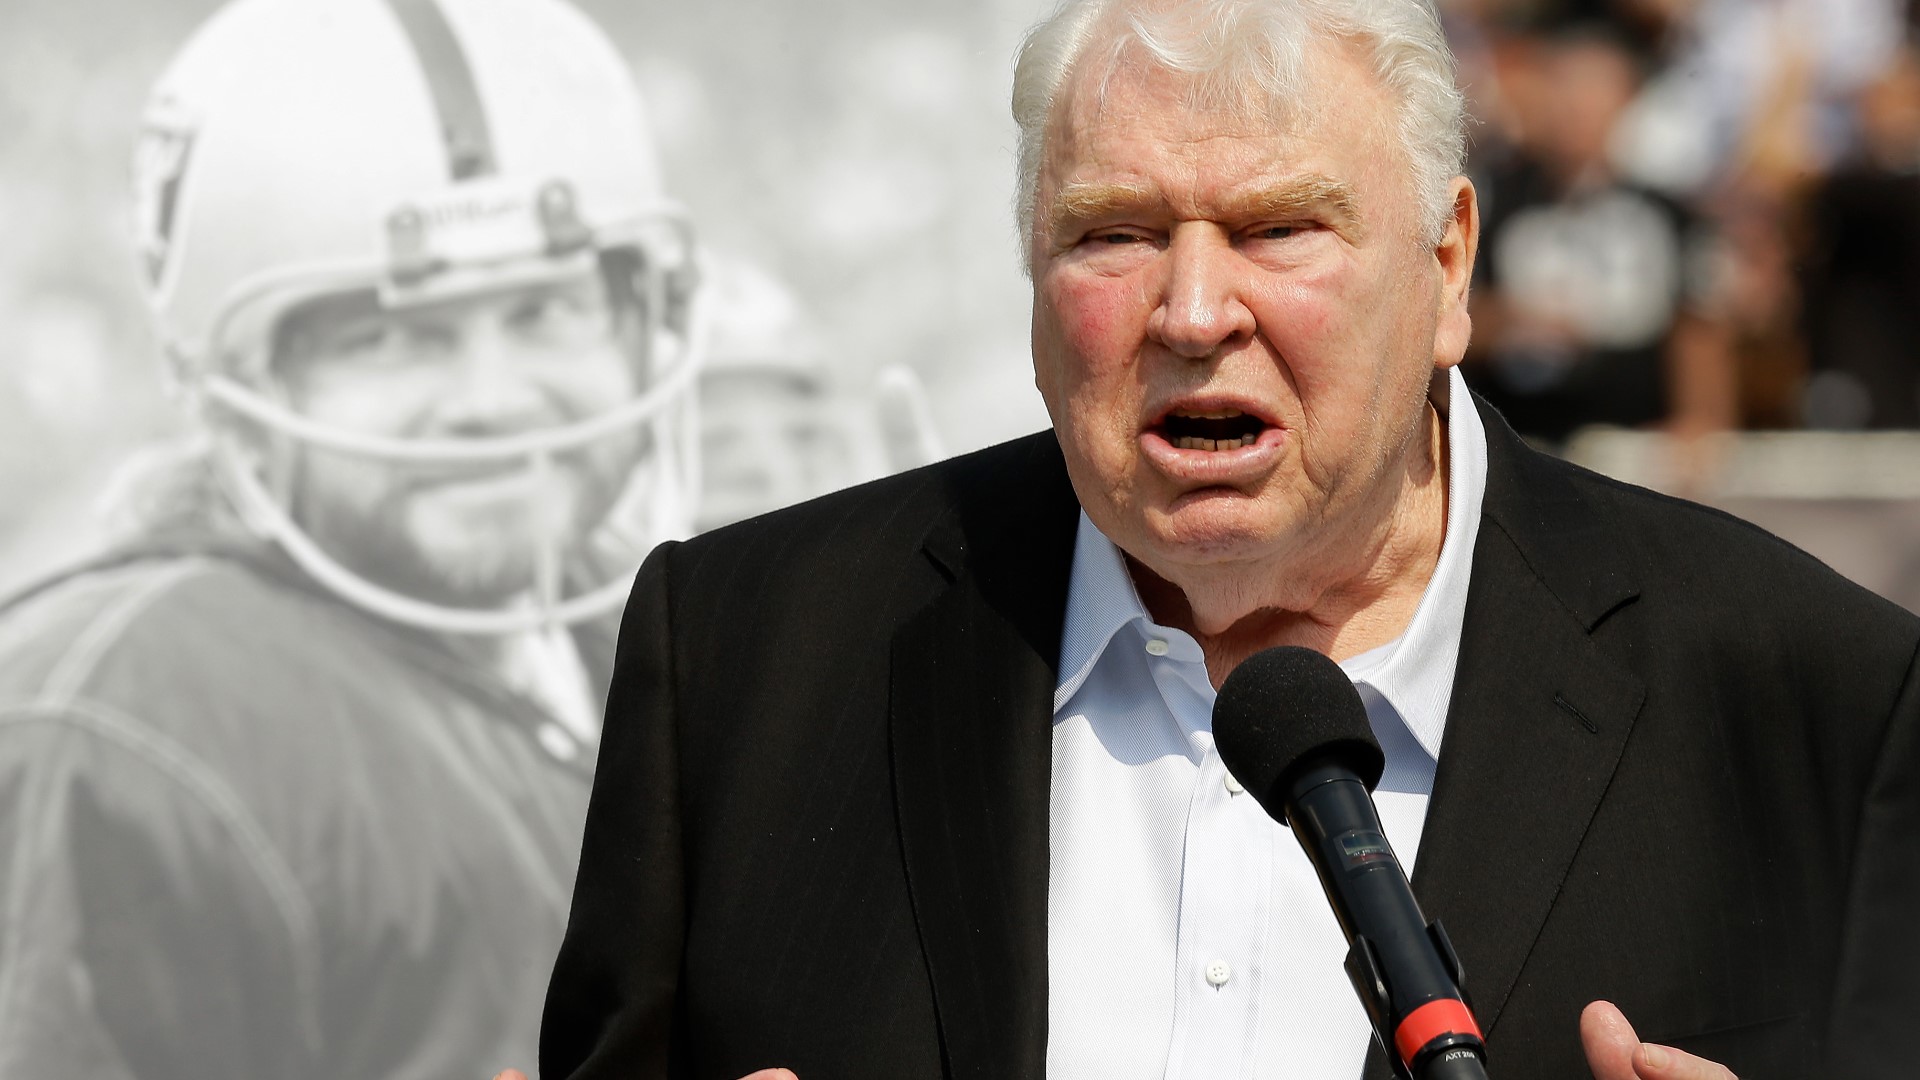 The NFL says Hall of Fame coach turned broadcaster John Madden has died at age 85.